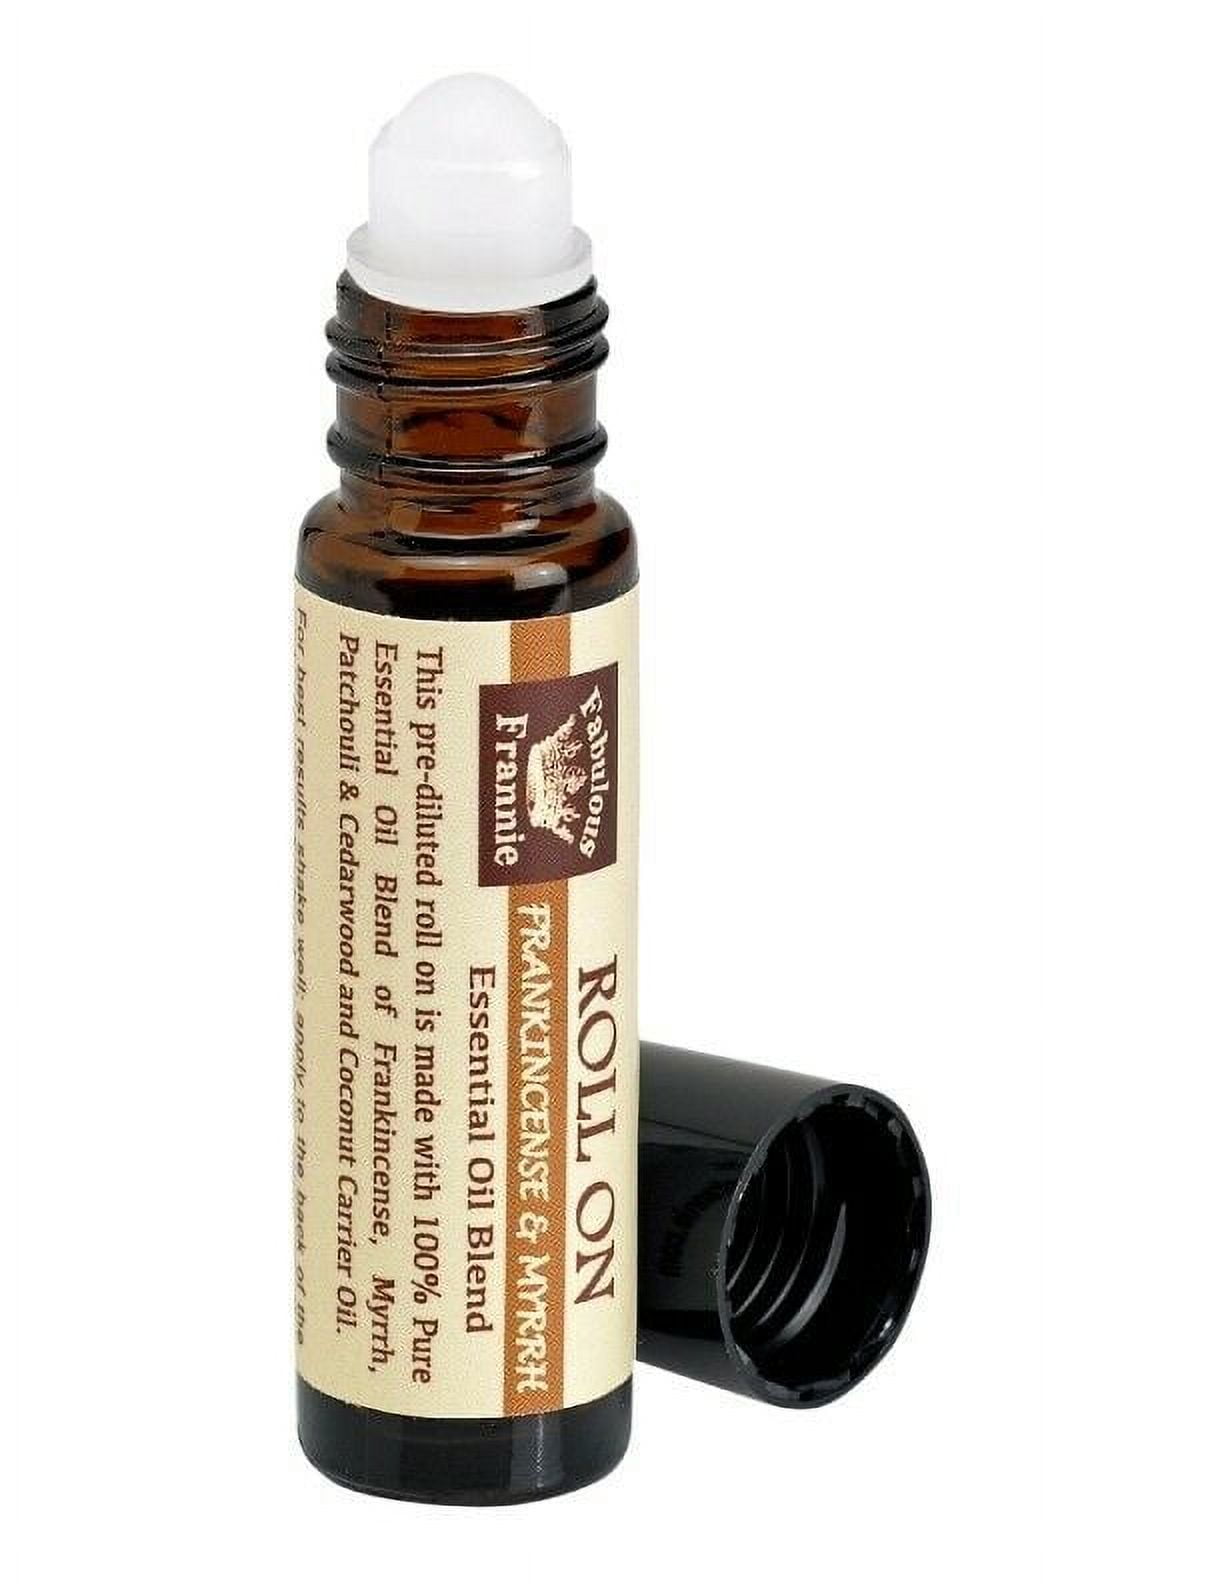 Frankincense and Myrrh Essential Oil Roll On–Natural Frankincense Essential  Oils & Myrrh, Gifts Under 10 Dollars, Essential Oil for Body Aches 